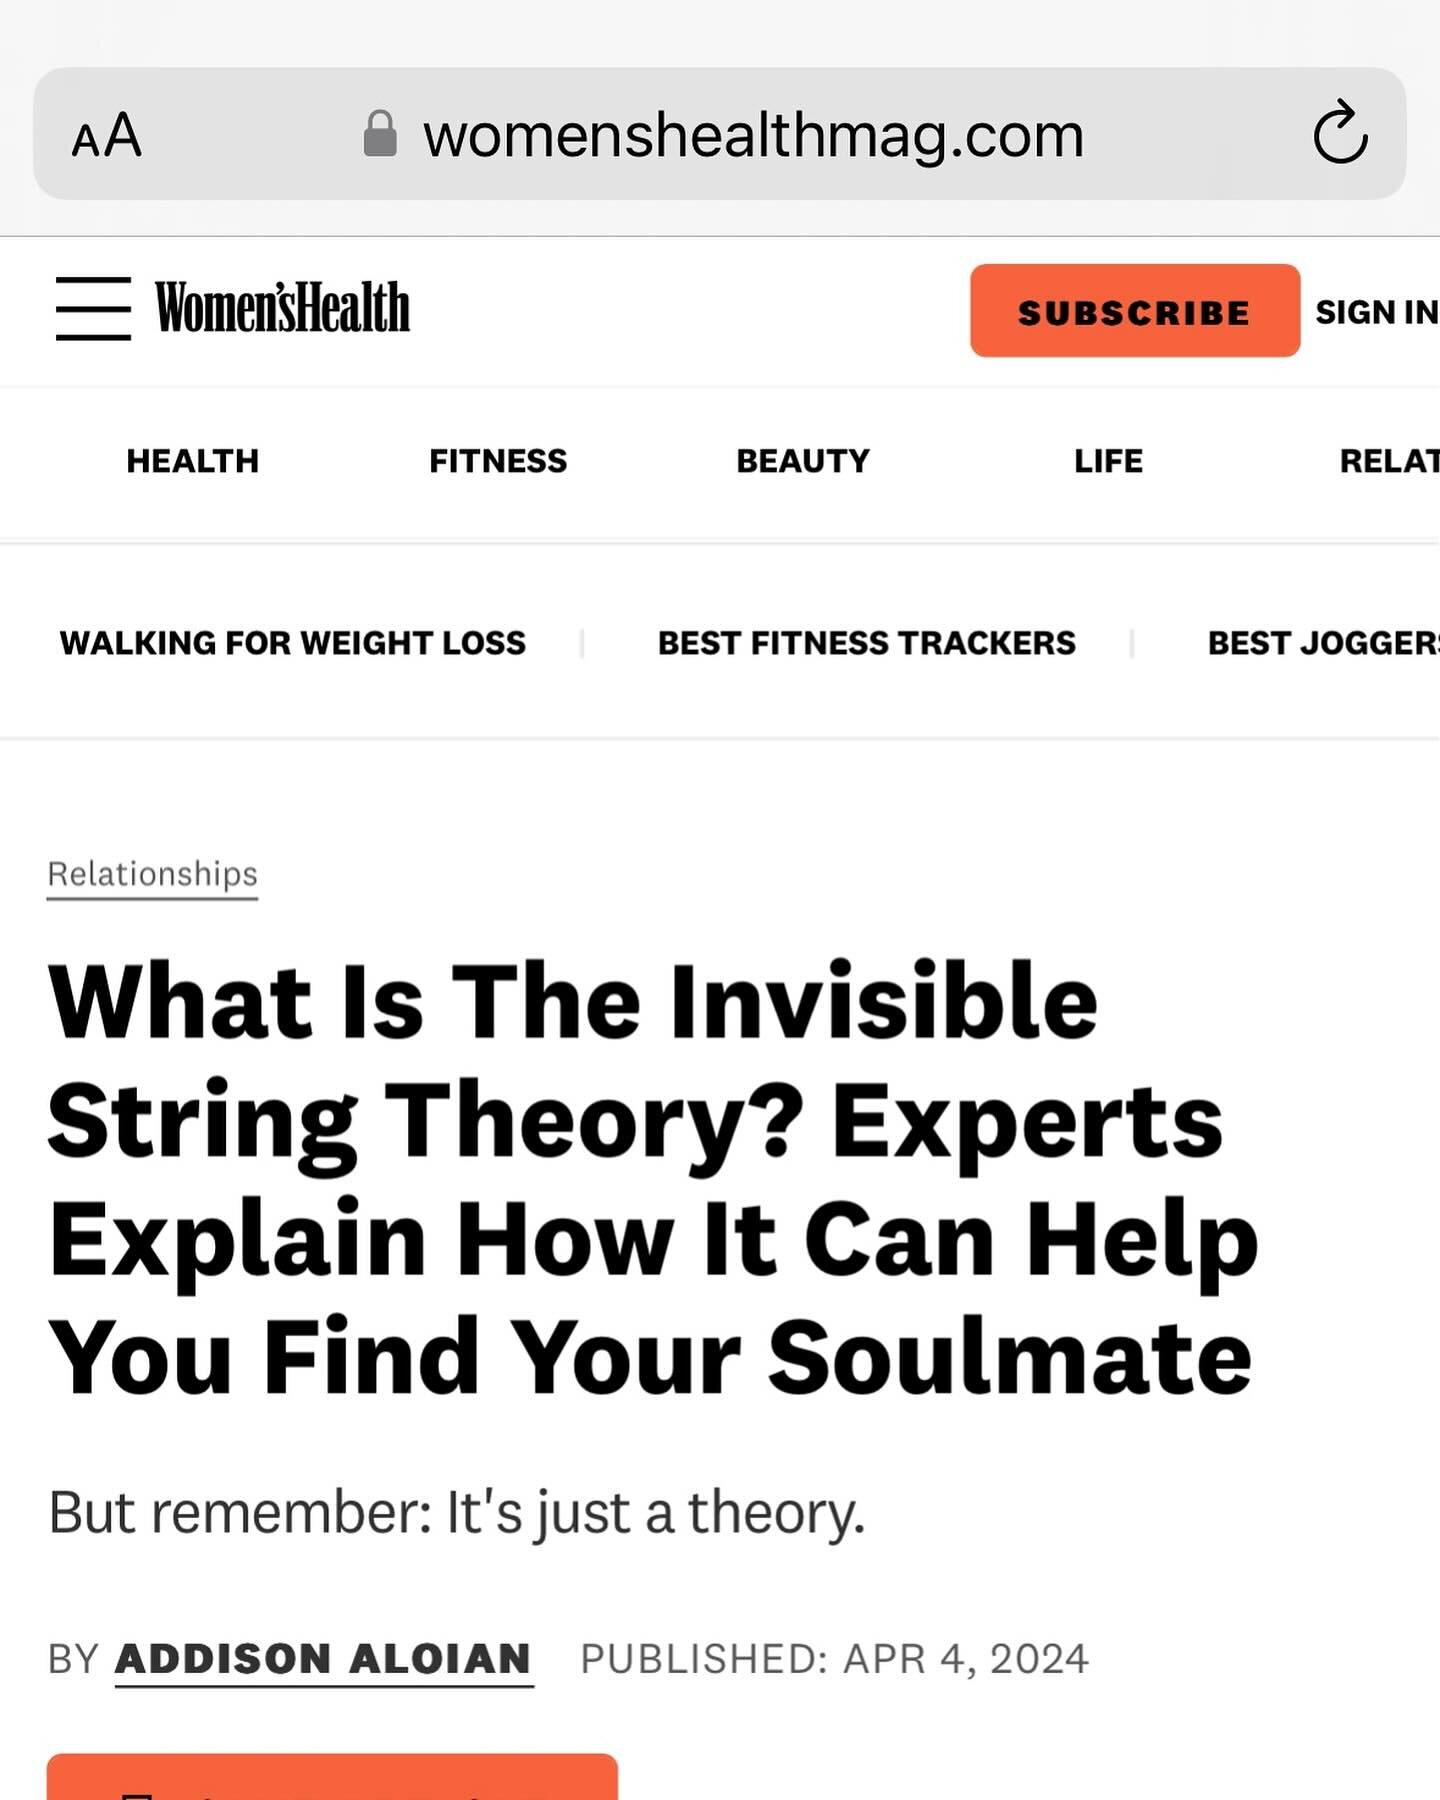 What is the invisible string theory? Thanks for the mention @womenshealthmag 💕